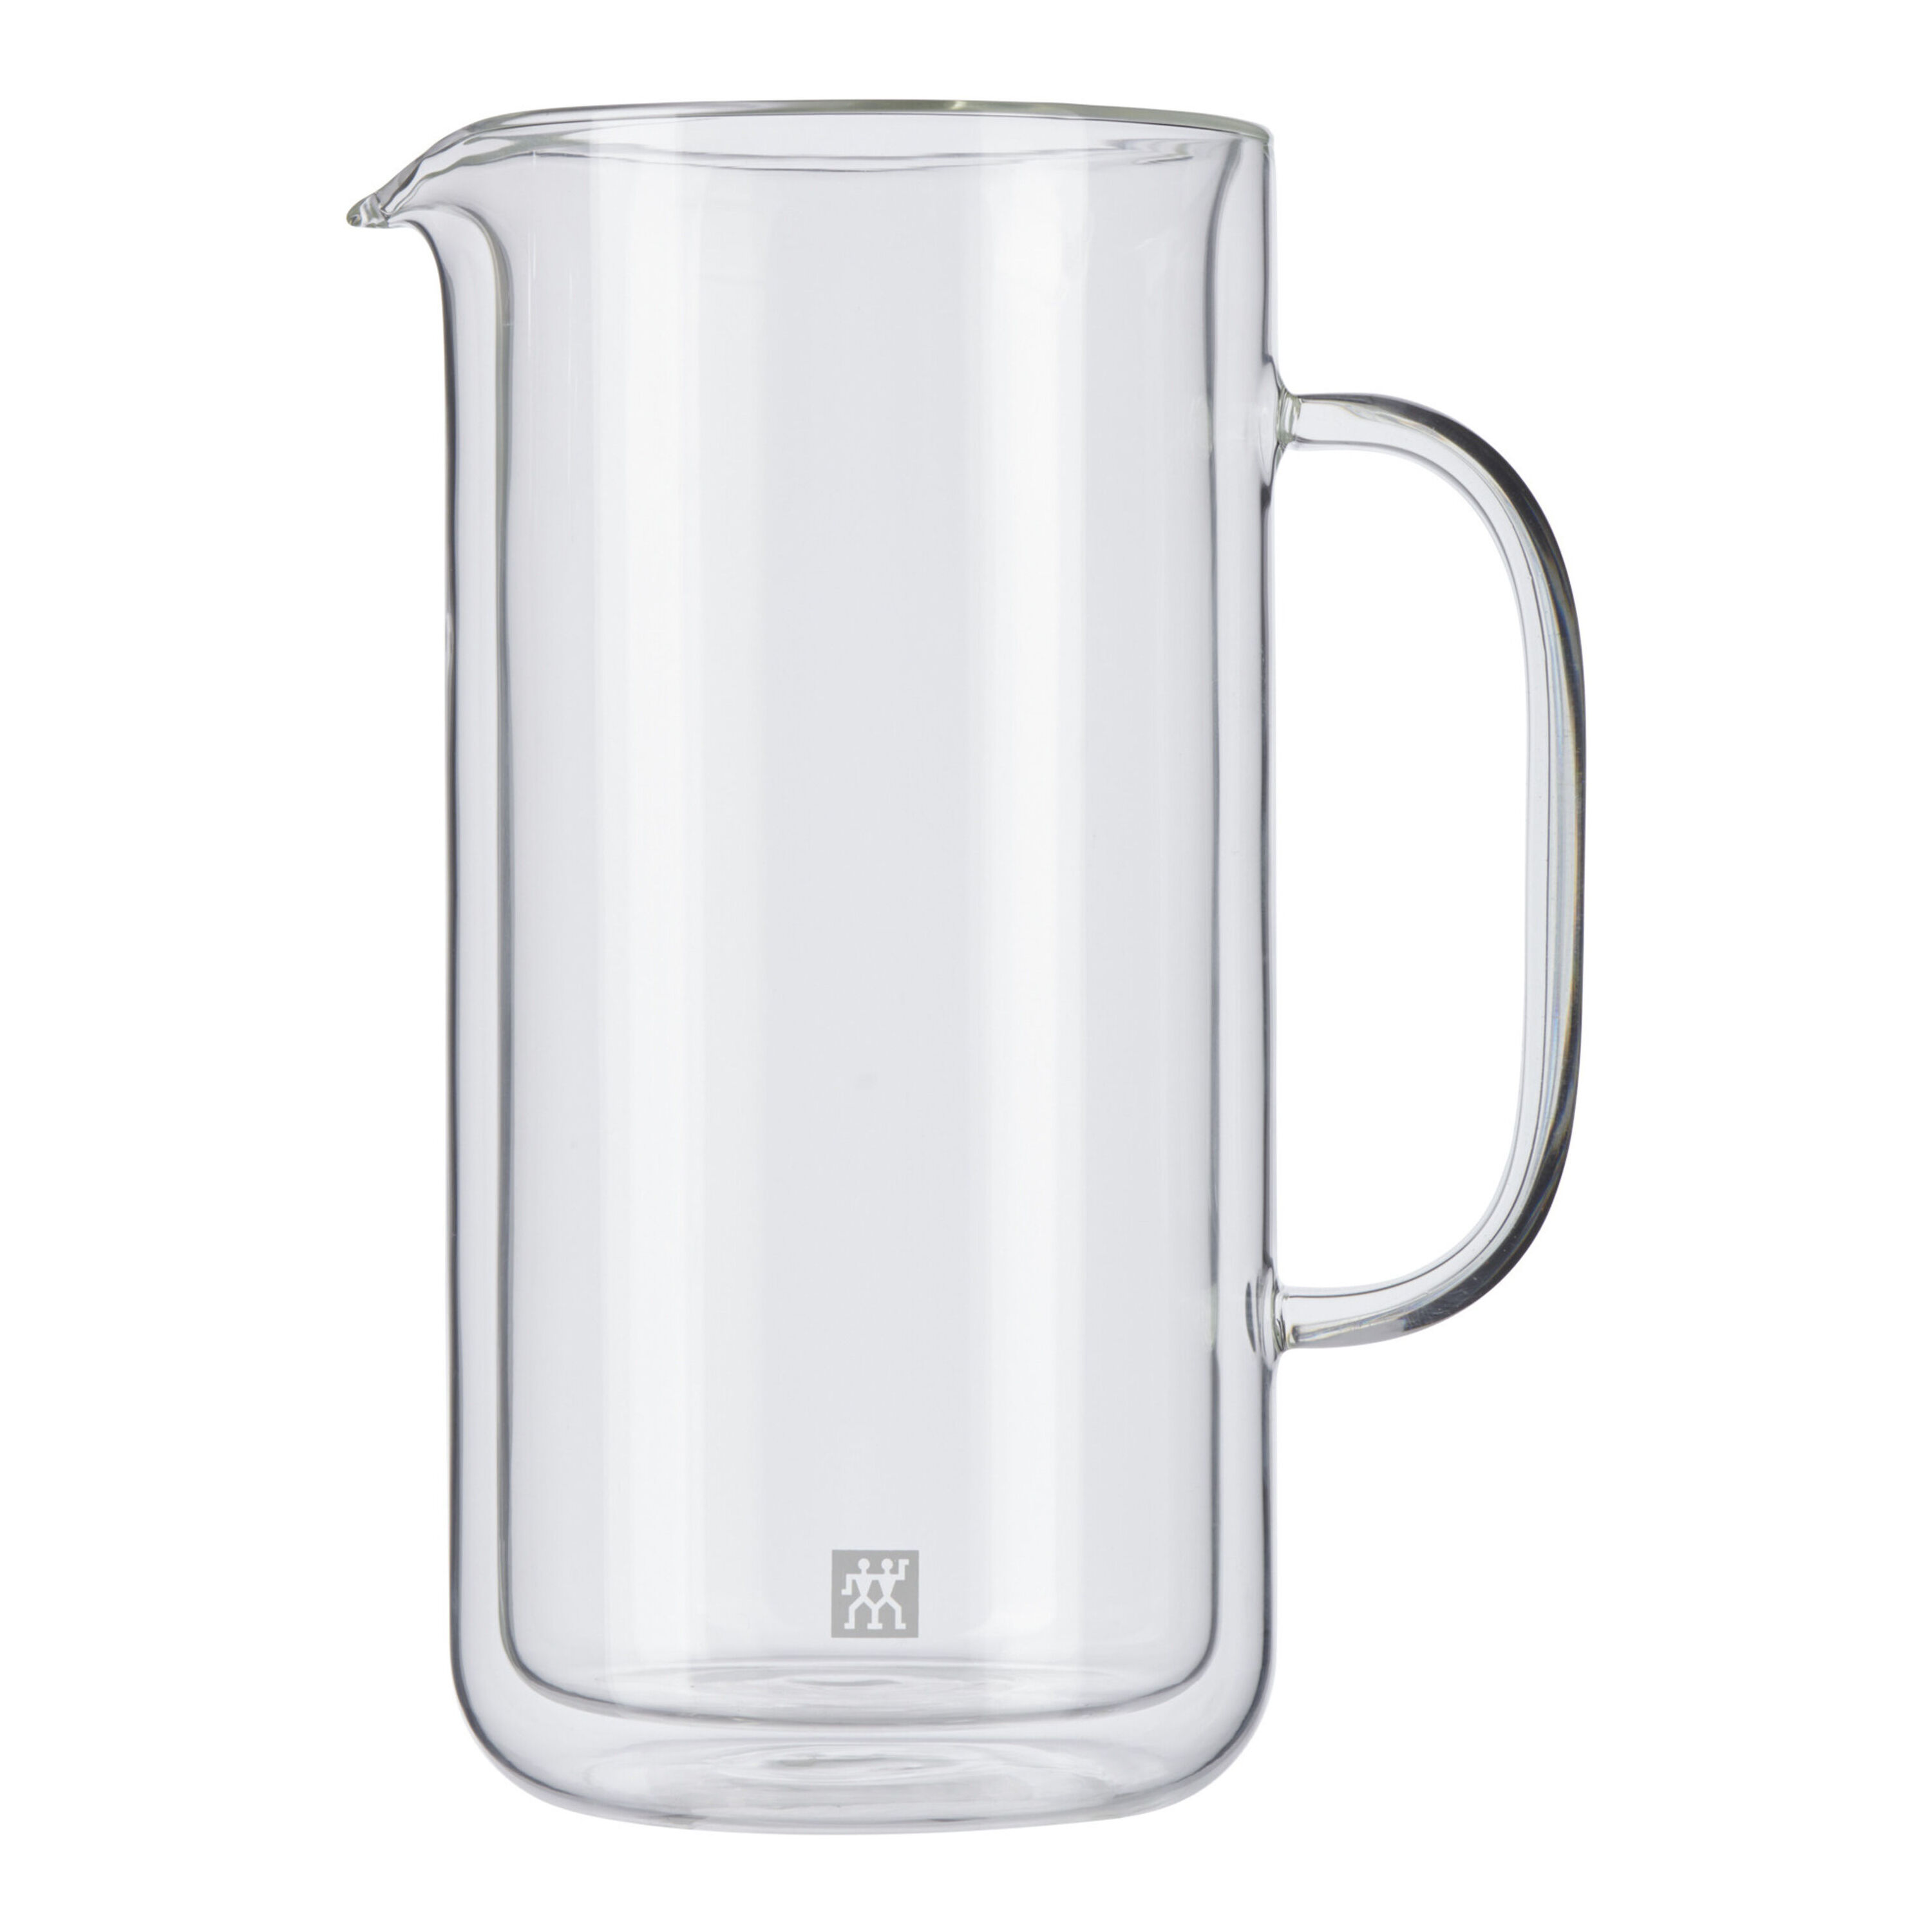 glass jug with lid, glass jug with lid Suppliers and Manufacturers at